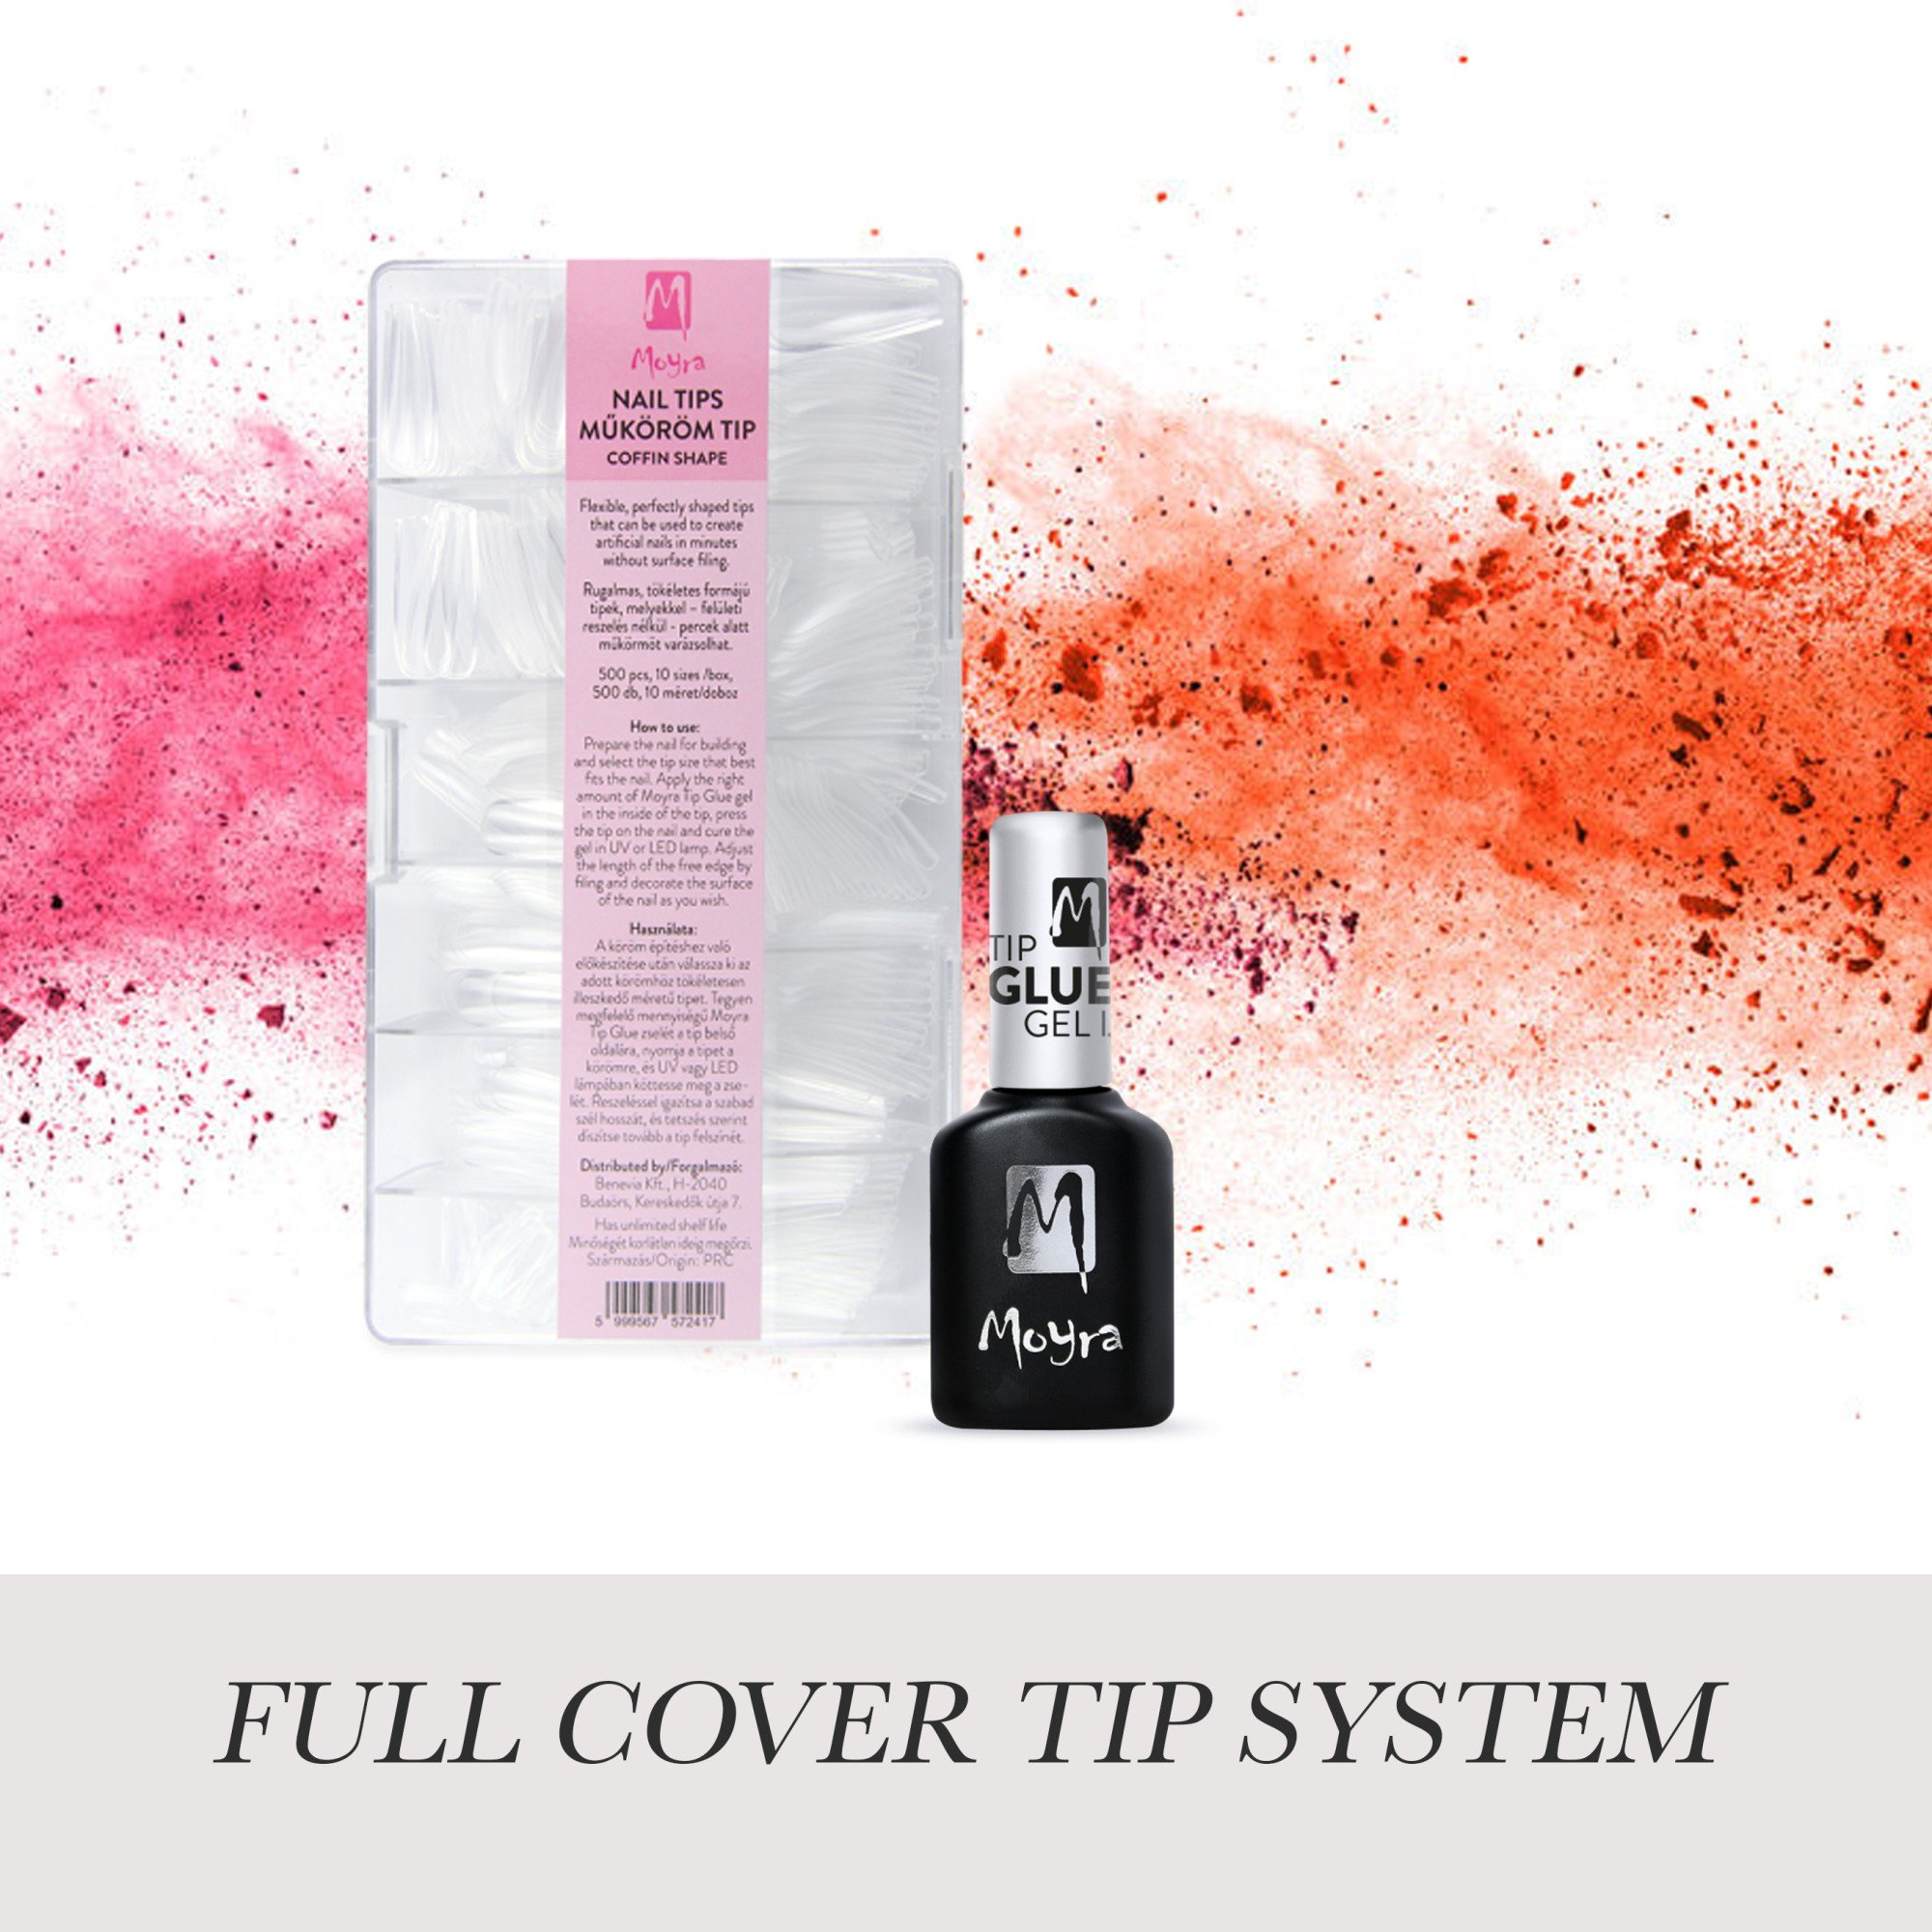 Full Cover Tip System - LaLuna PRO AS